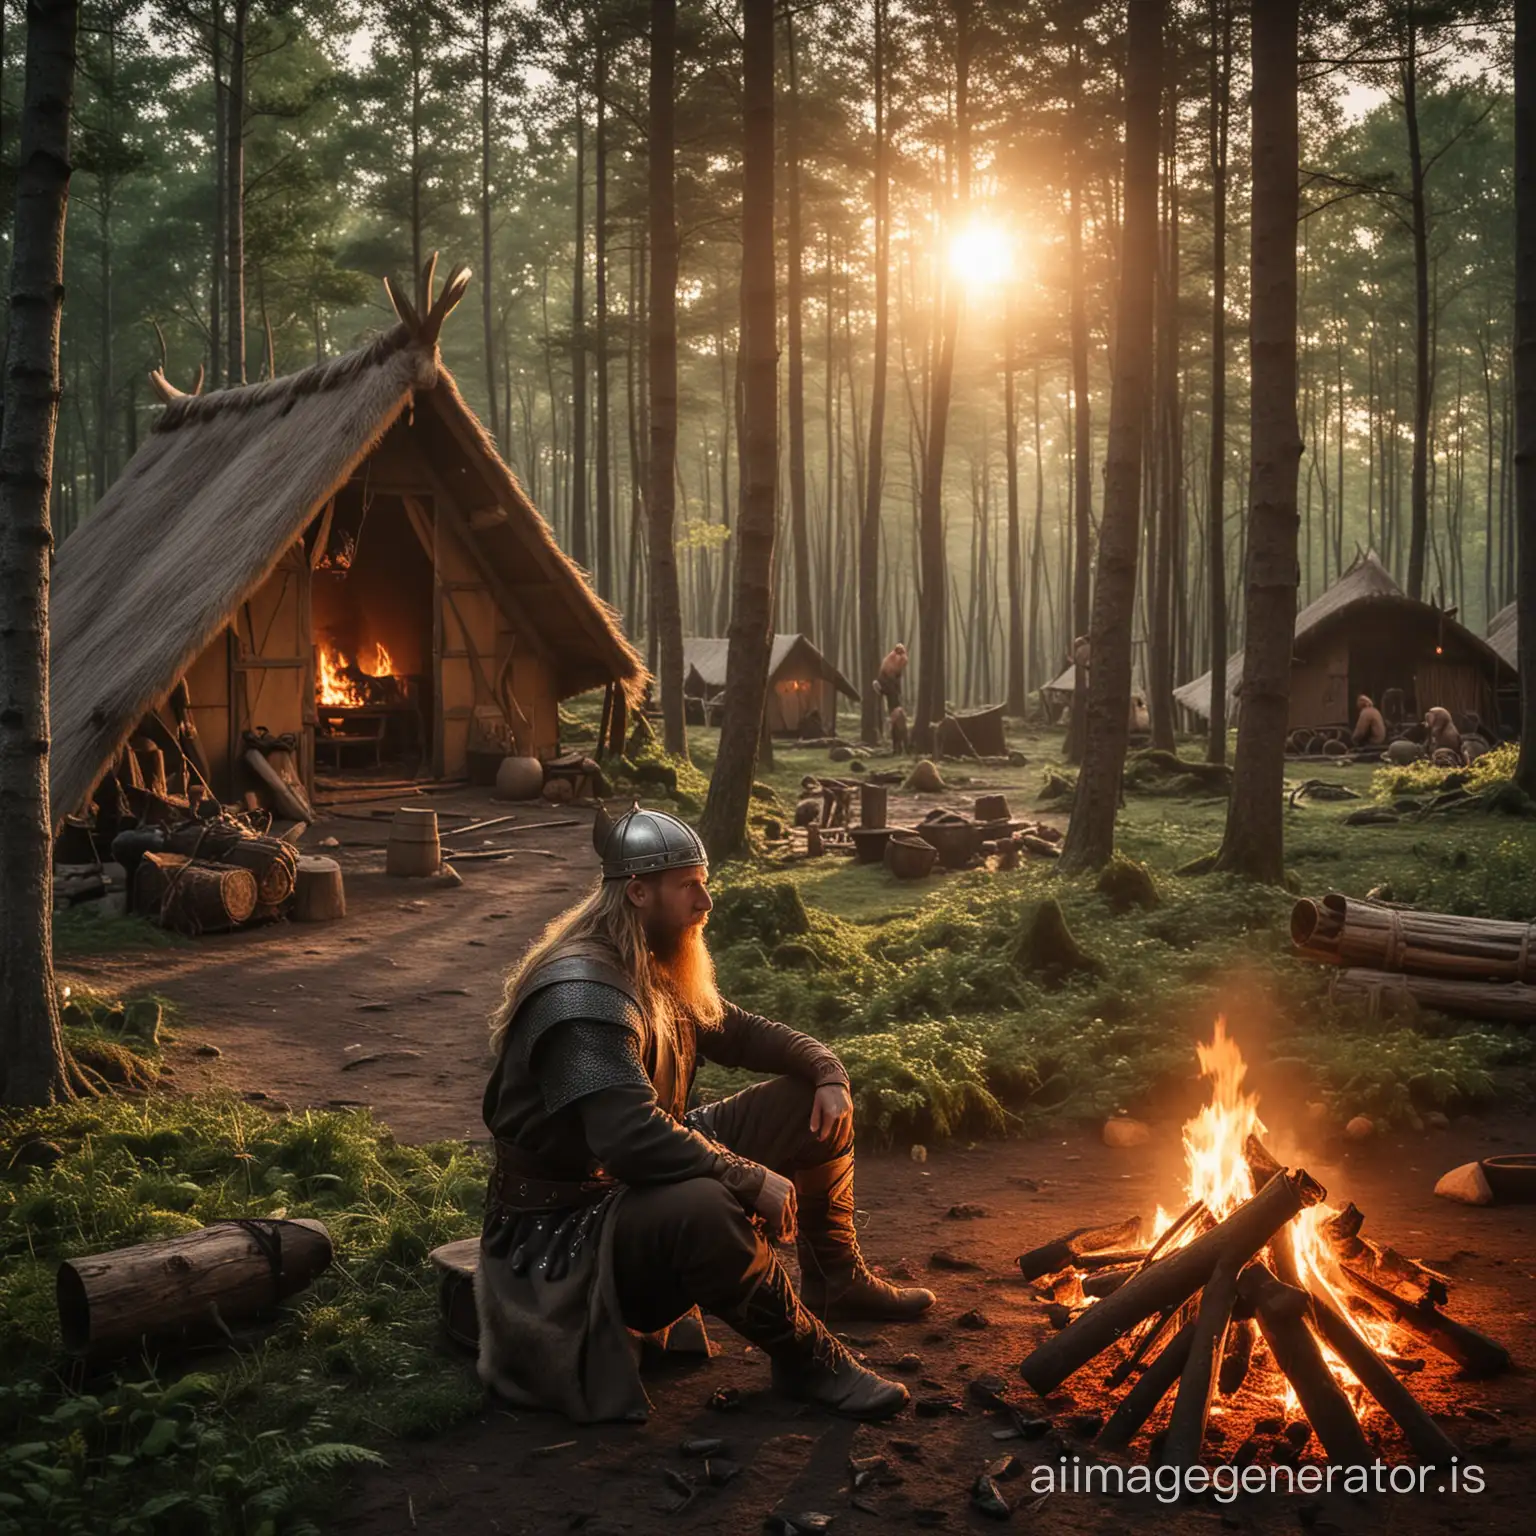 Viking in a forest with the sun going down sitting by a fire whith viking huts set up all around them